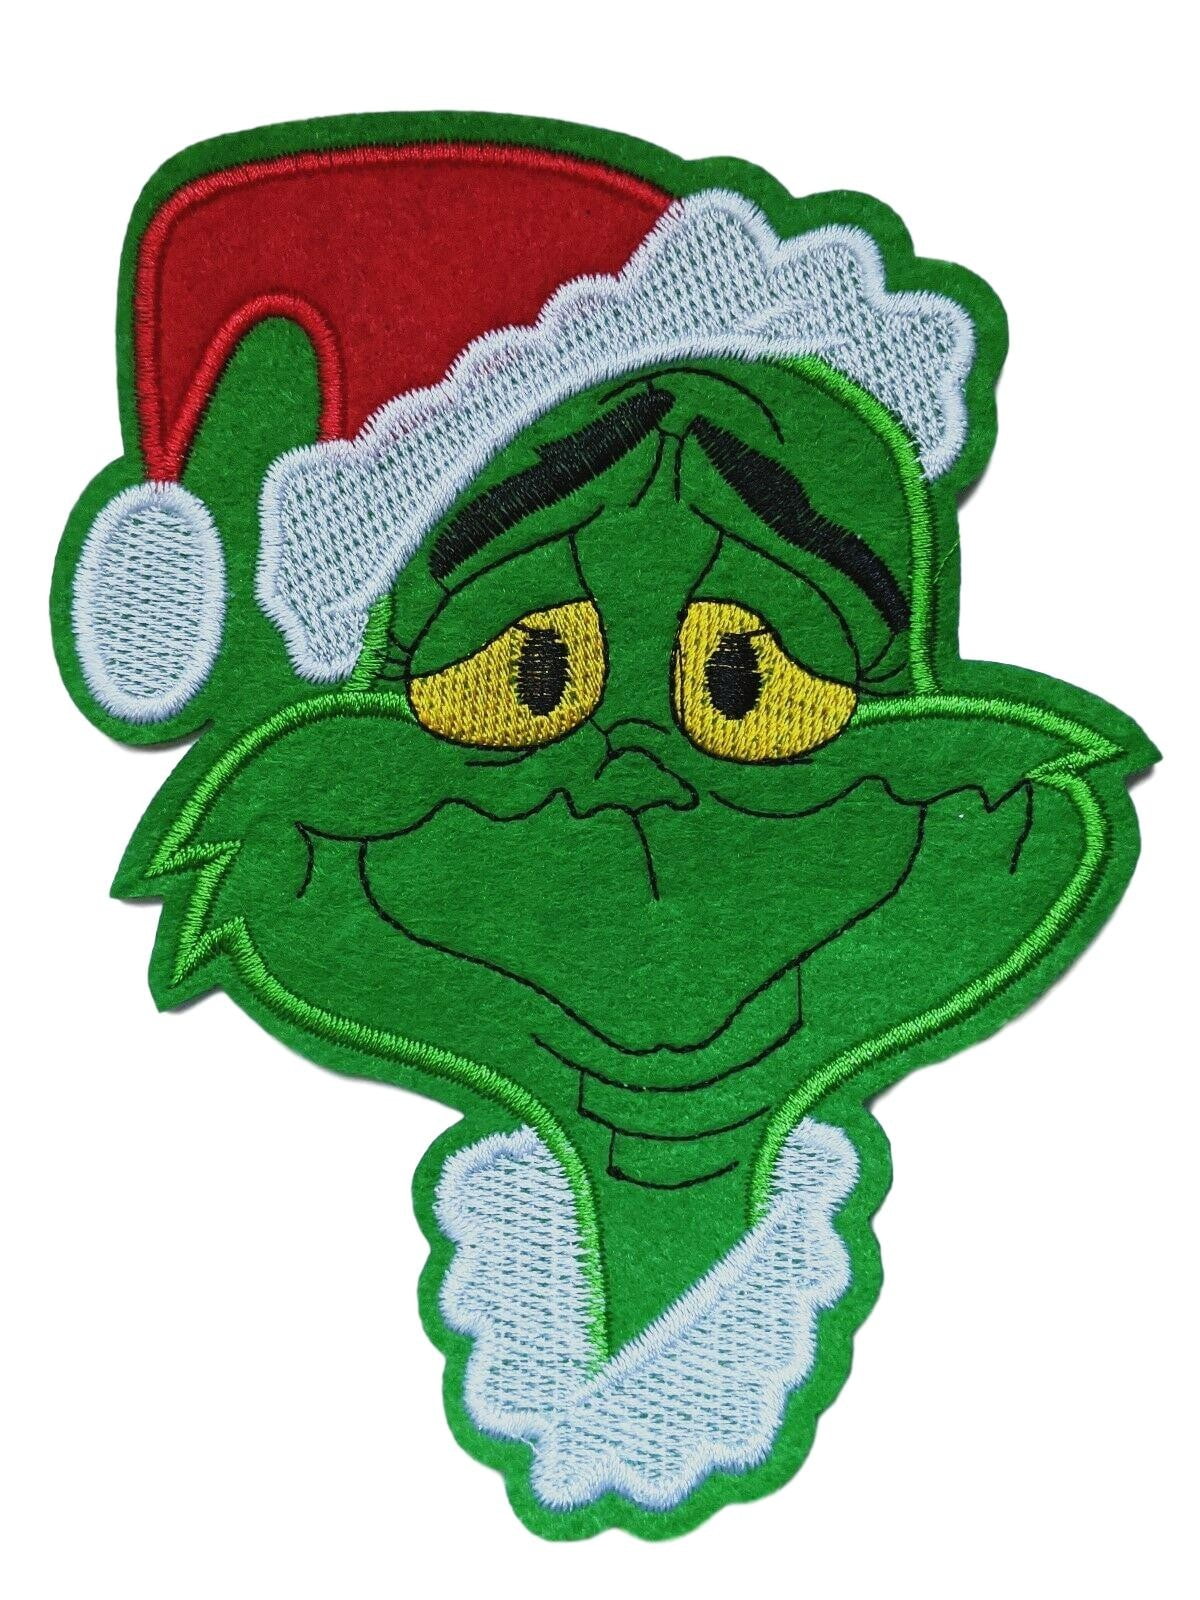 The Grinch Cartoon Character 6 Inches Tall Embroidered Iron On Patch